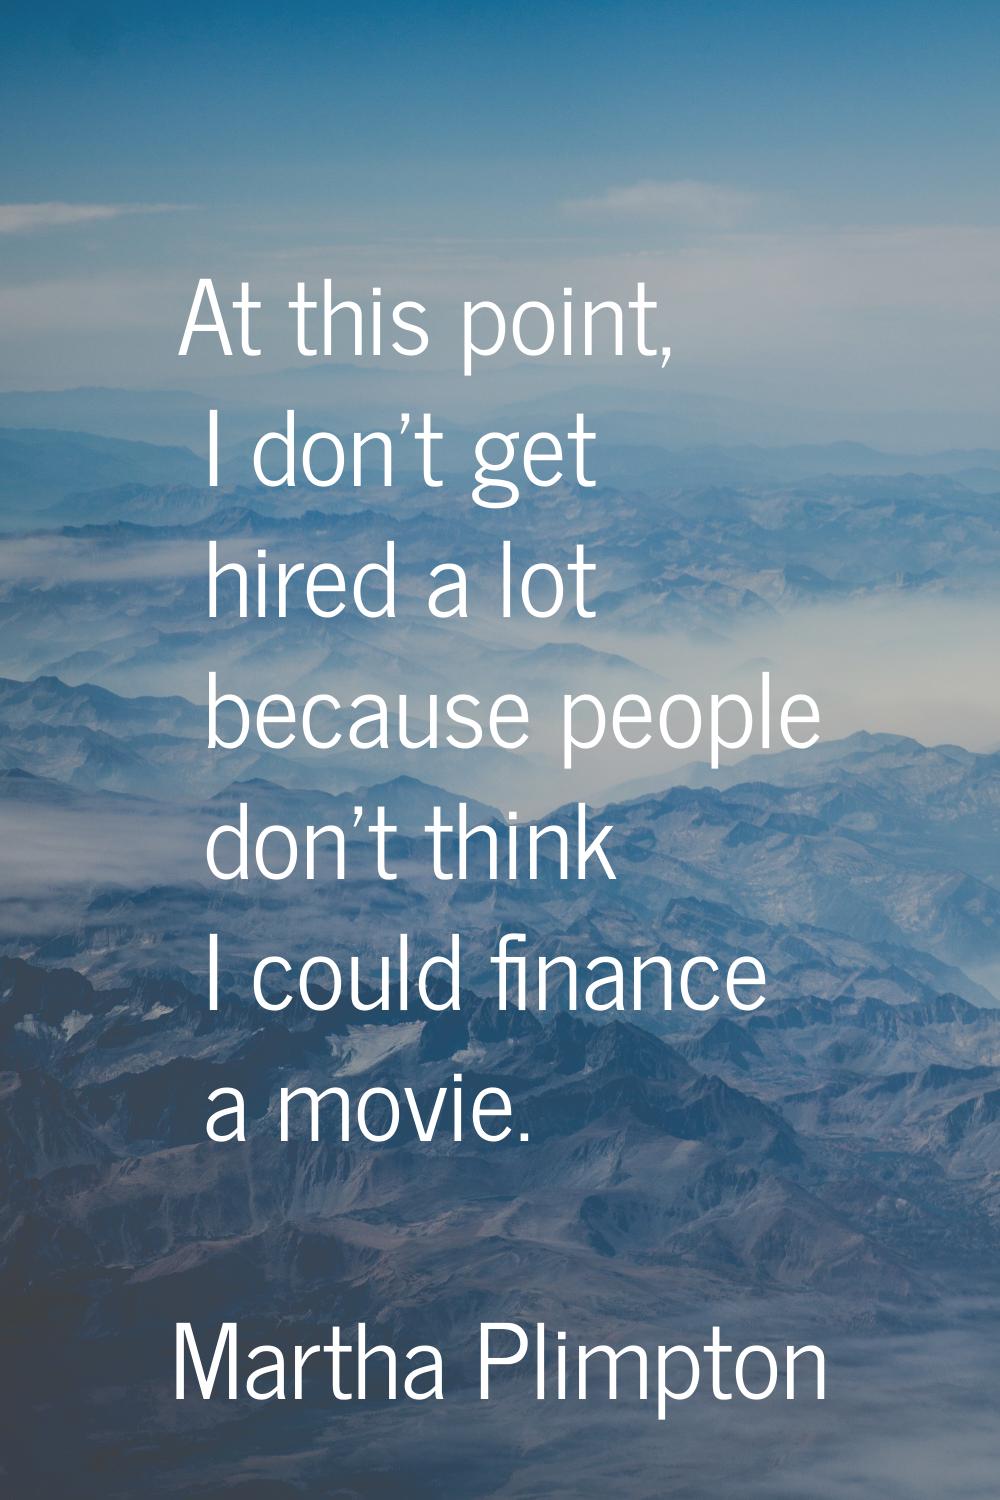 At this point, I don't get hired a lot because people don't think I could finance a movie.